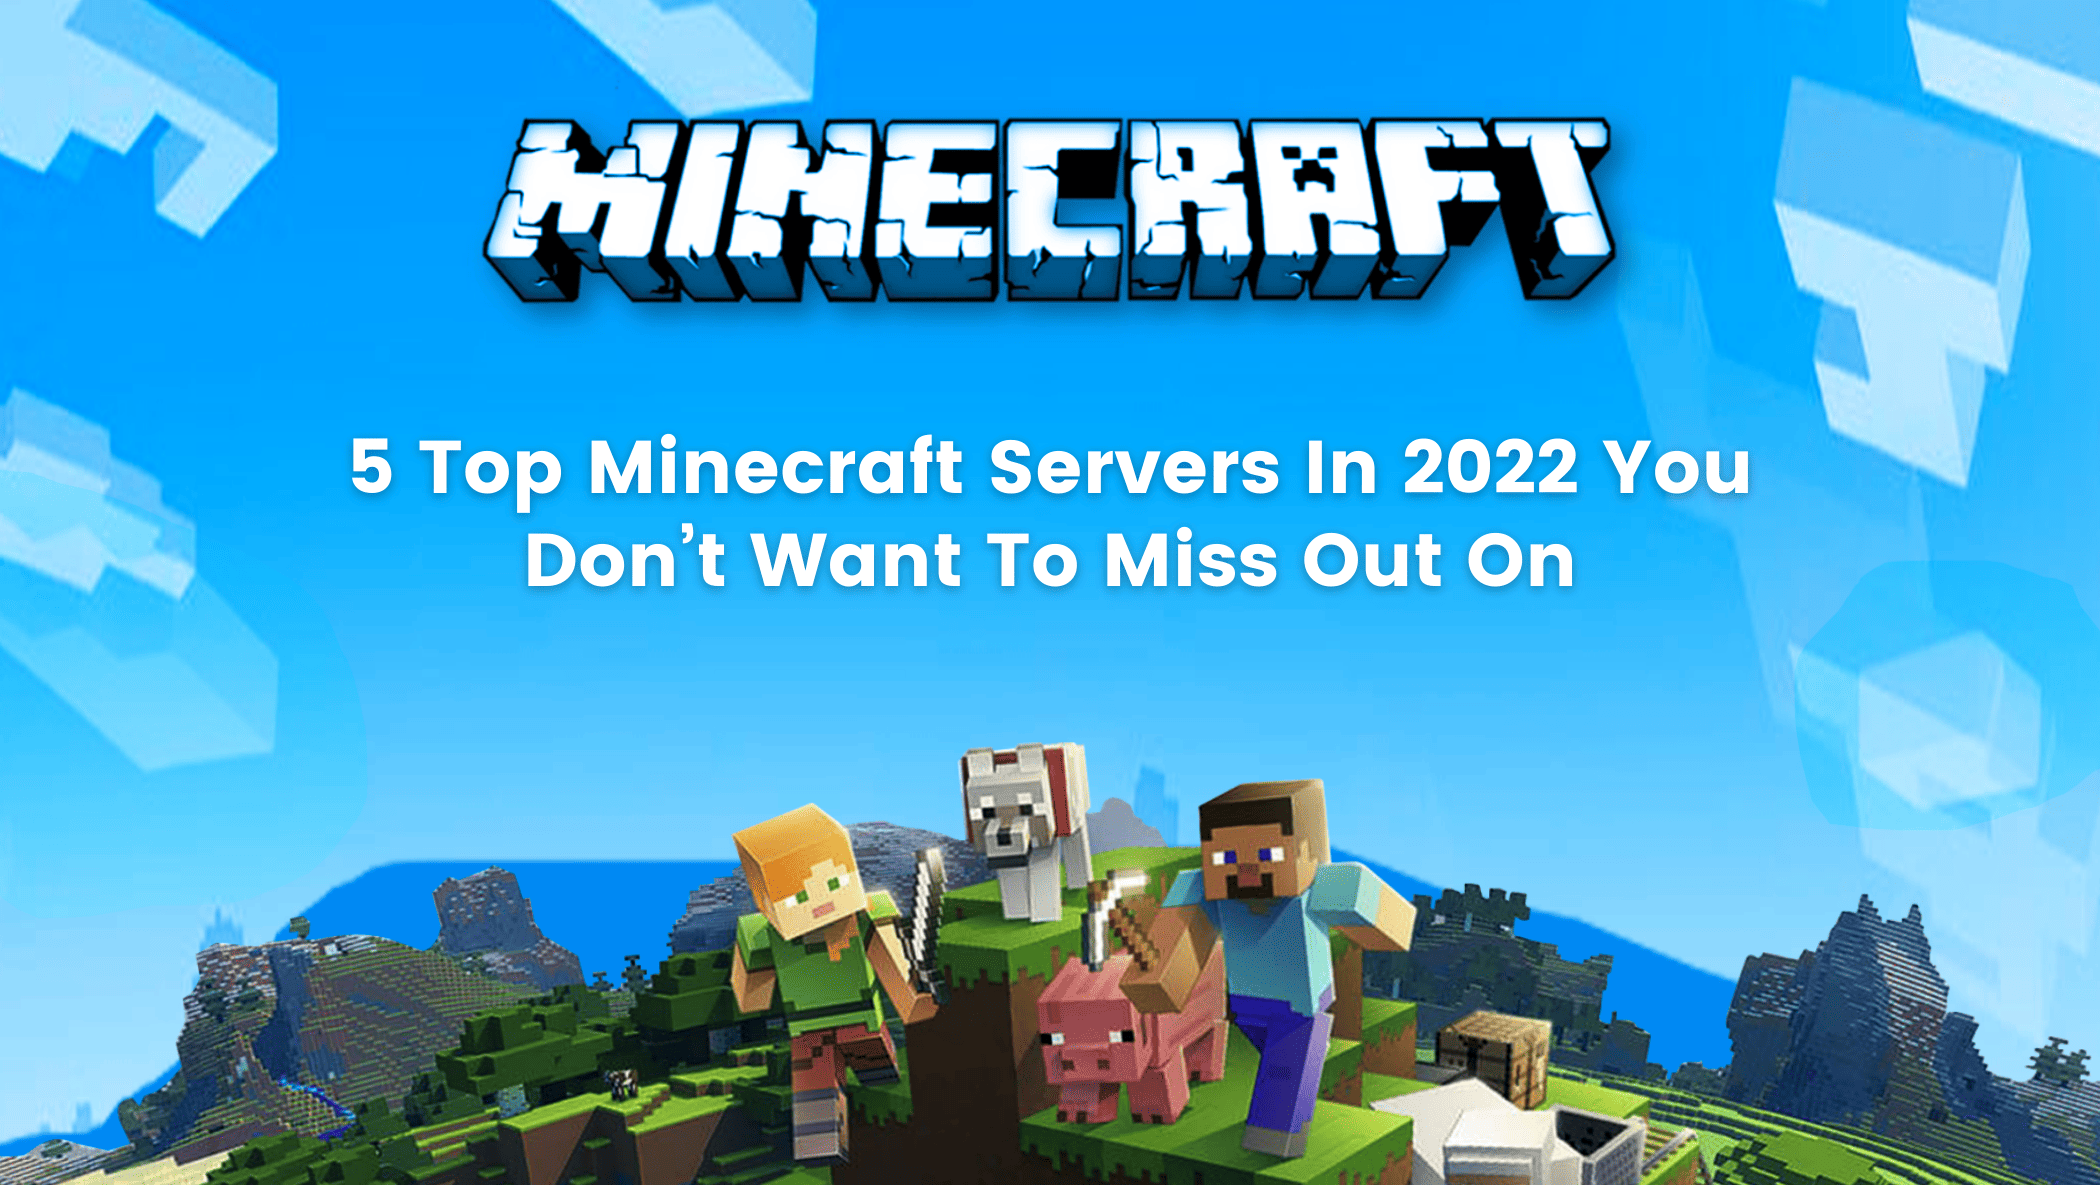 5 Top Minecraft Servers In 2022 You Don’t Want To Miss Out On